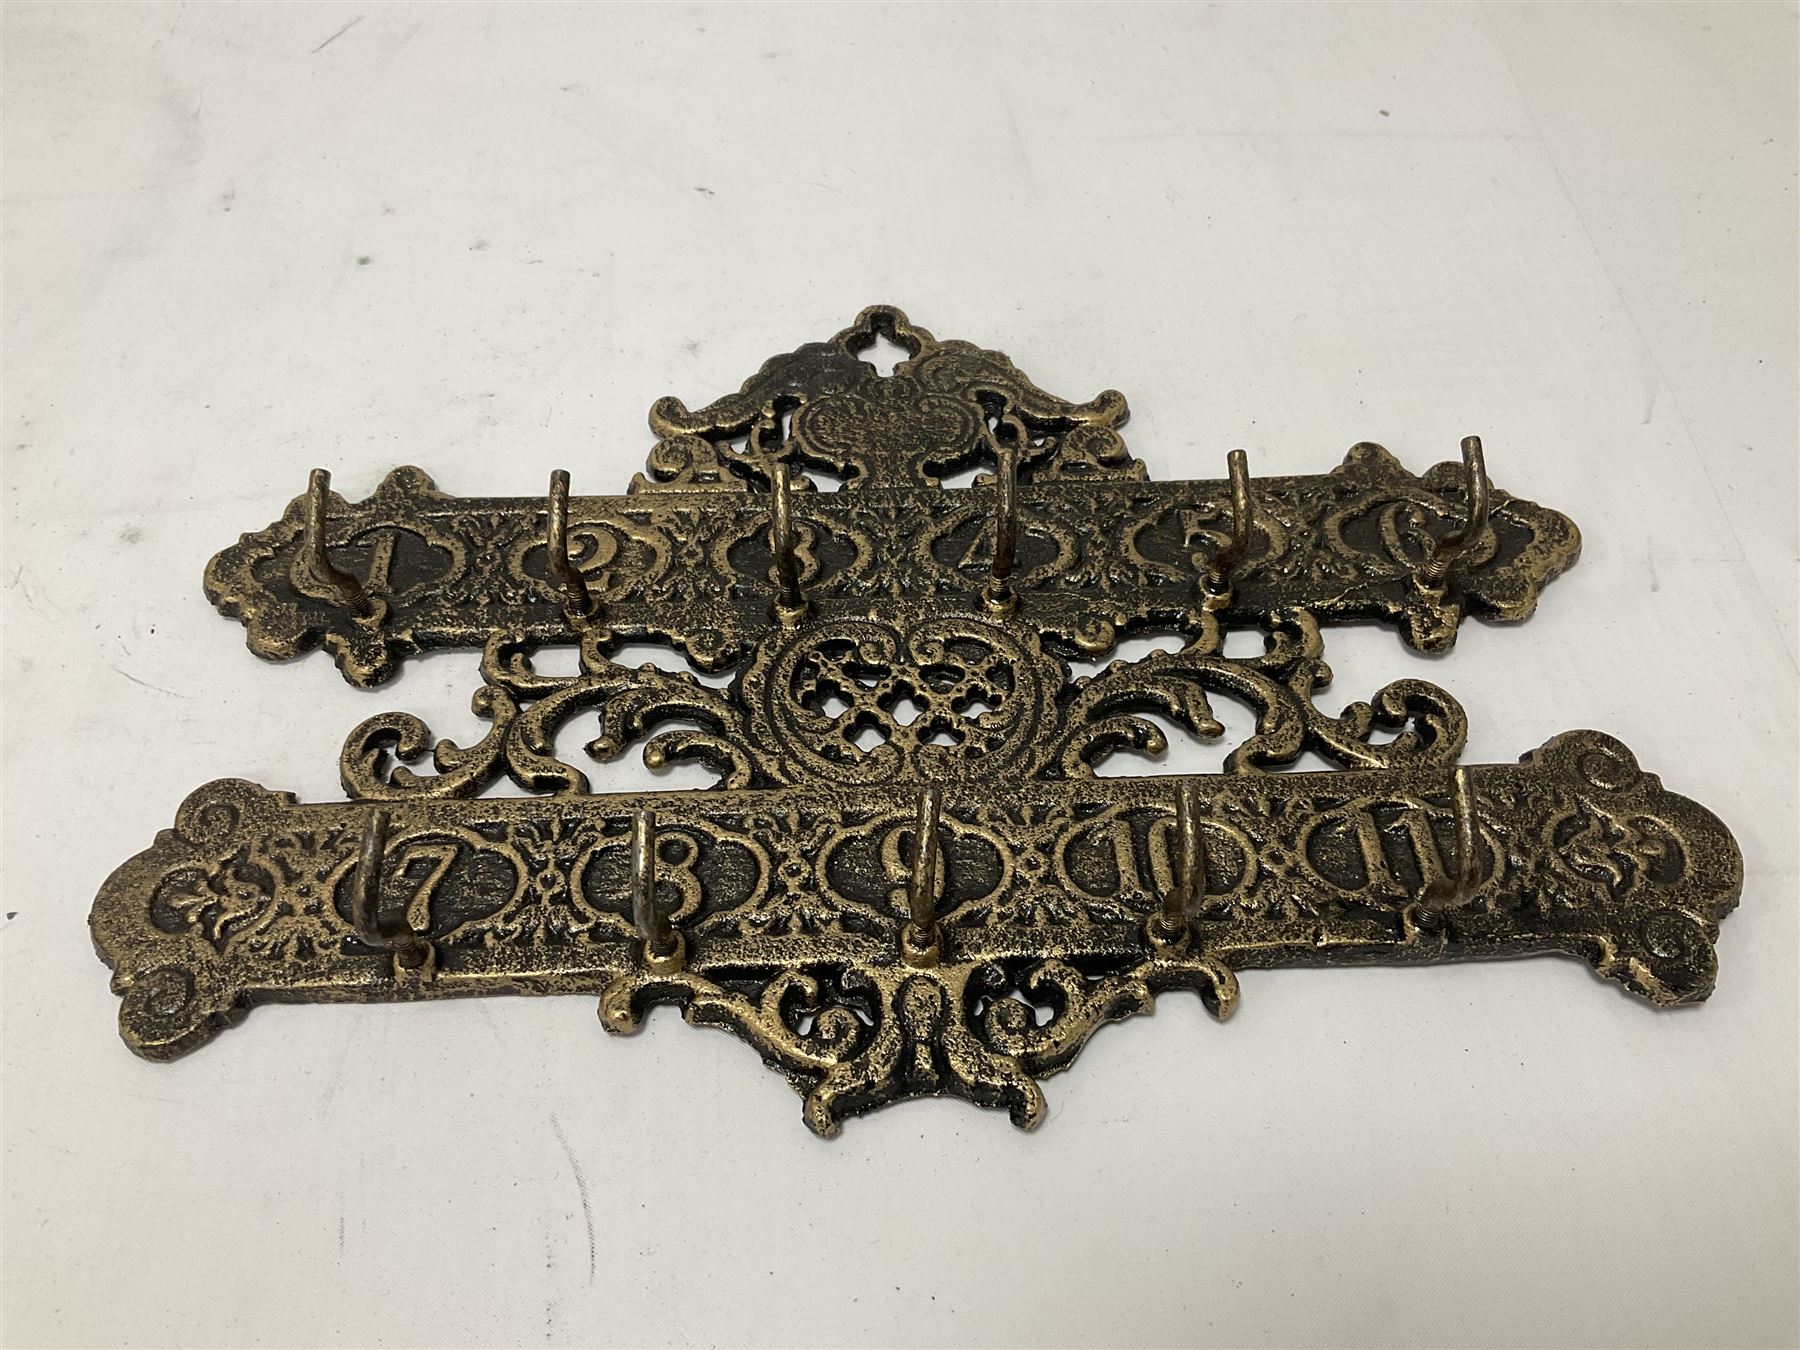 Bronzed cast metal numbered key rack of pierced and scrolled design - Image 3 of 6